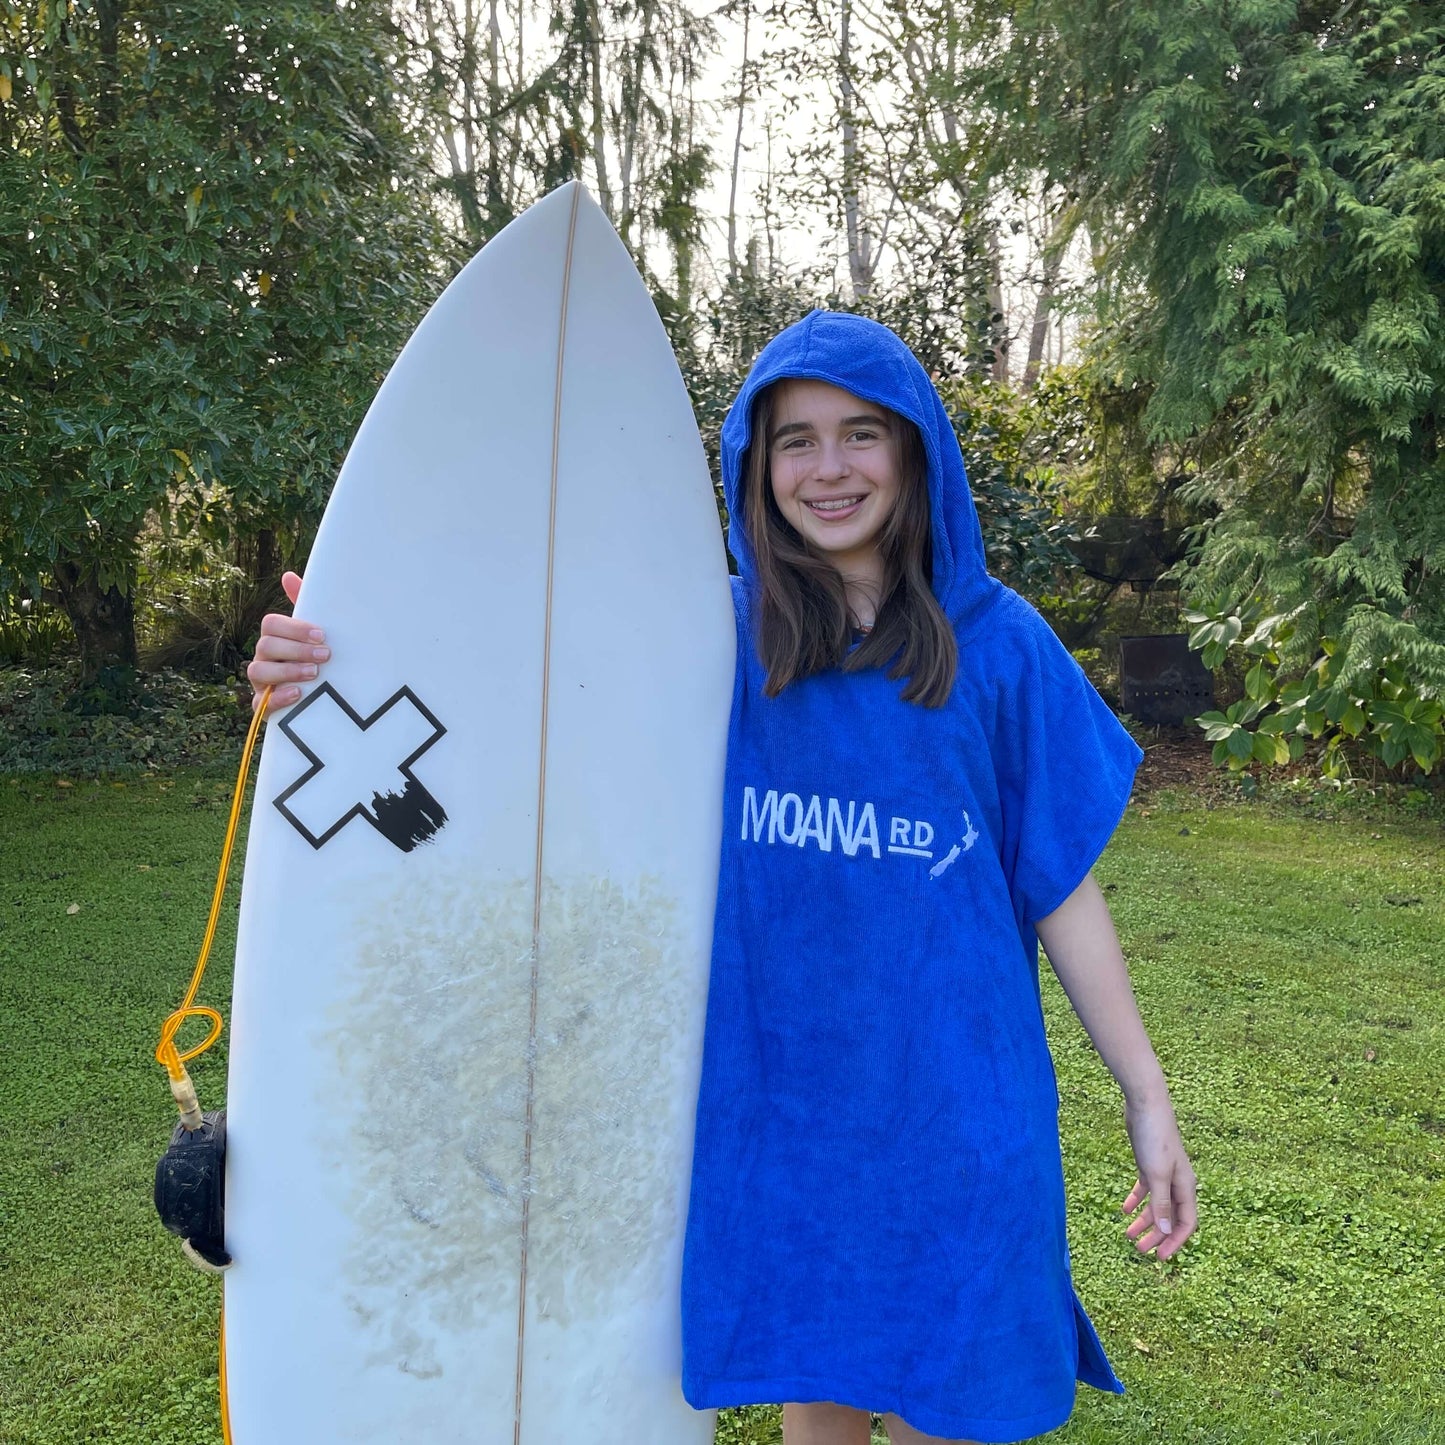 Young girl wearing a blue towel hoodie with the words Moana RD on it in white and a map of New Zealand. She is holding a surfboard.